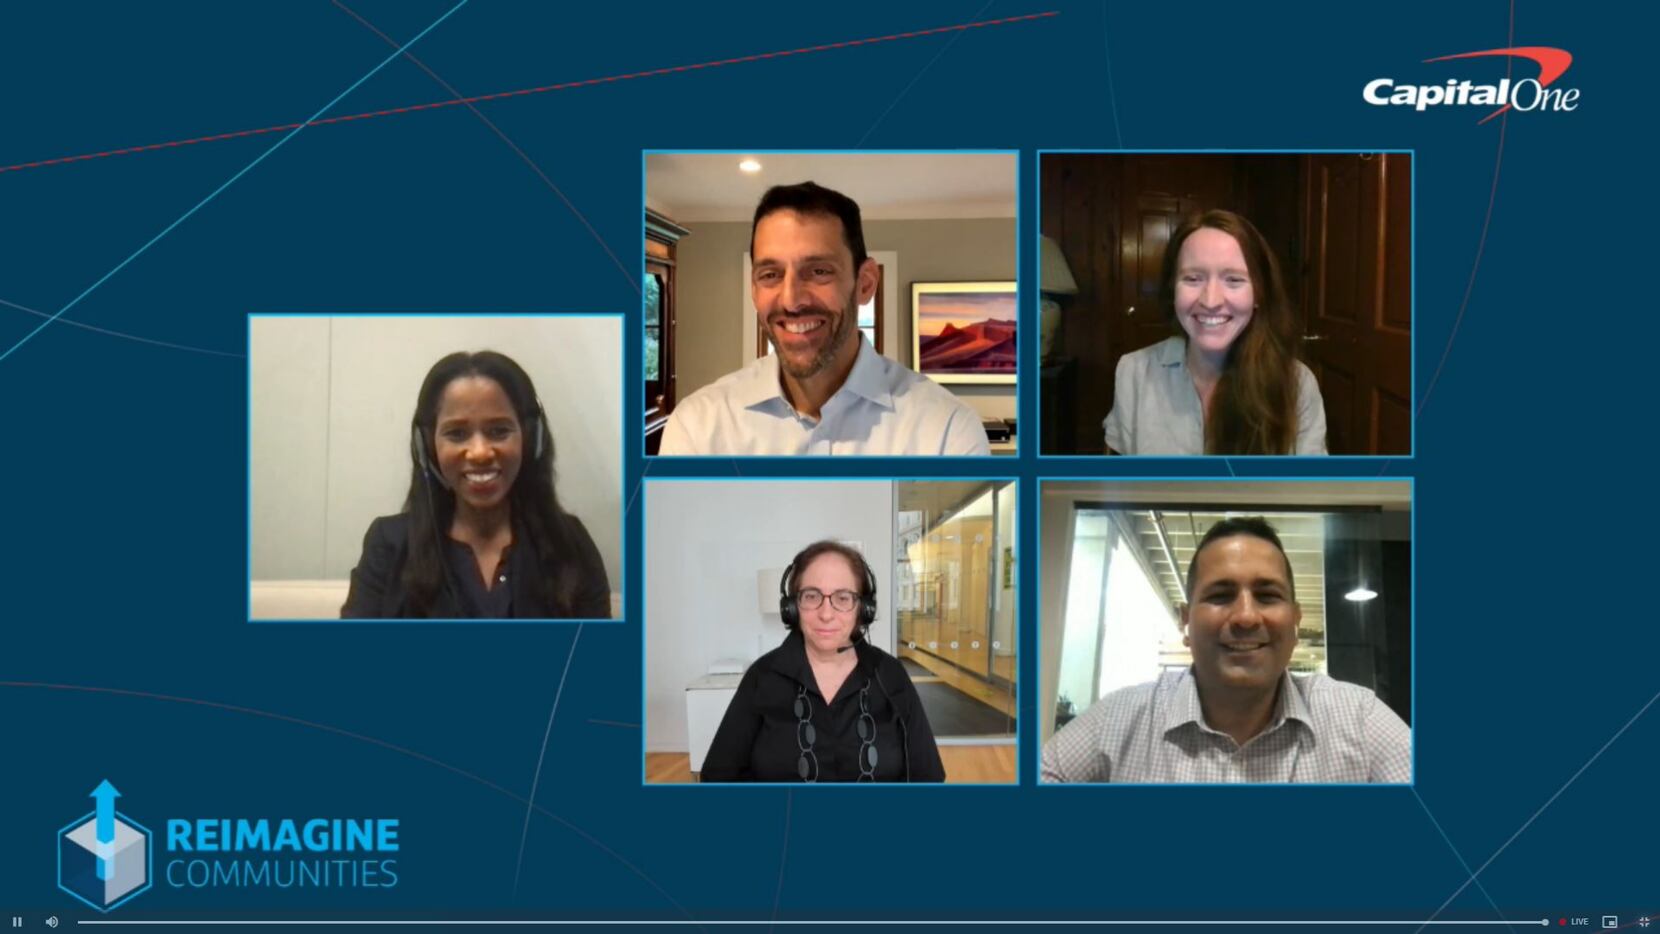 A screenshot of a video conference panel discussion for the 2021 Reimagine Communities Summit.